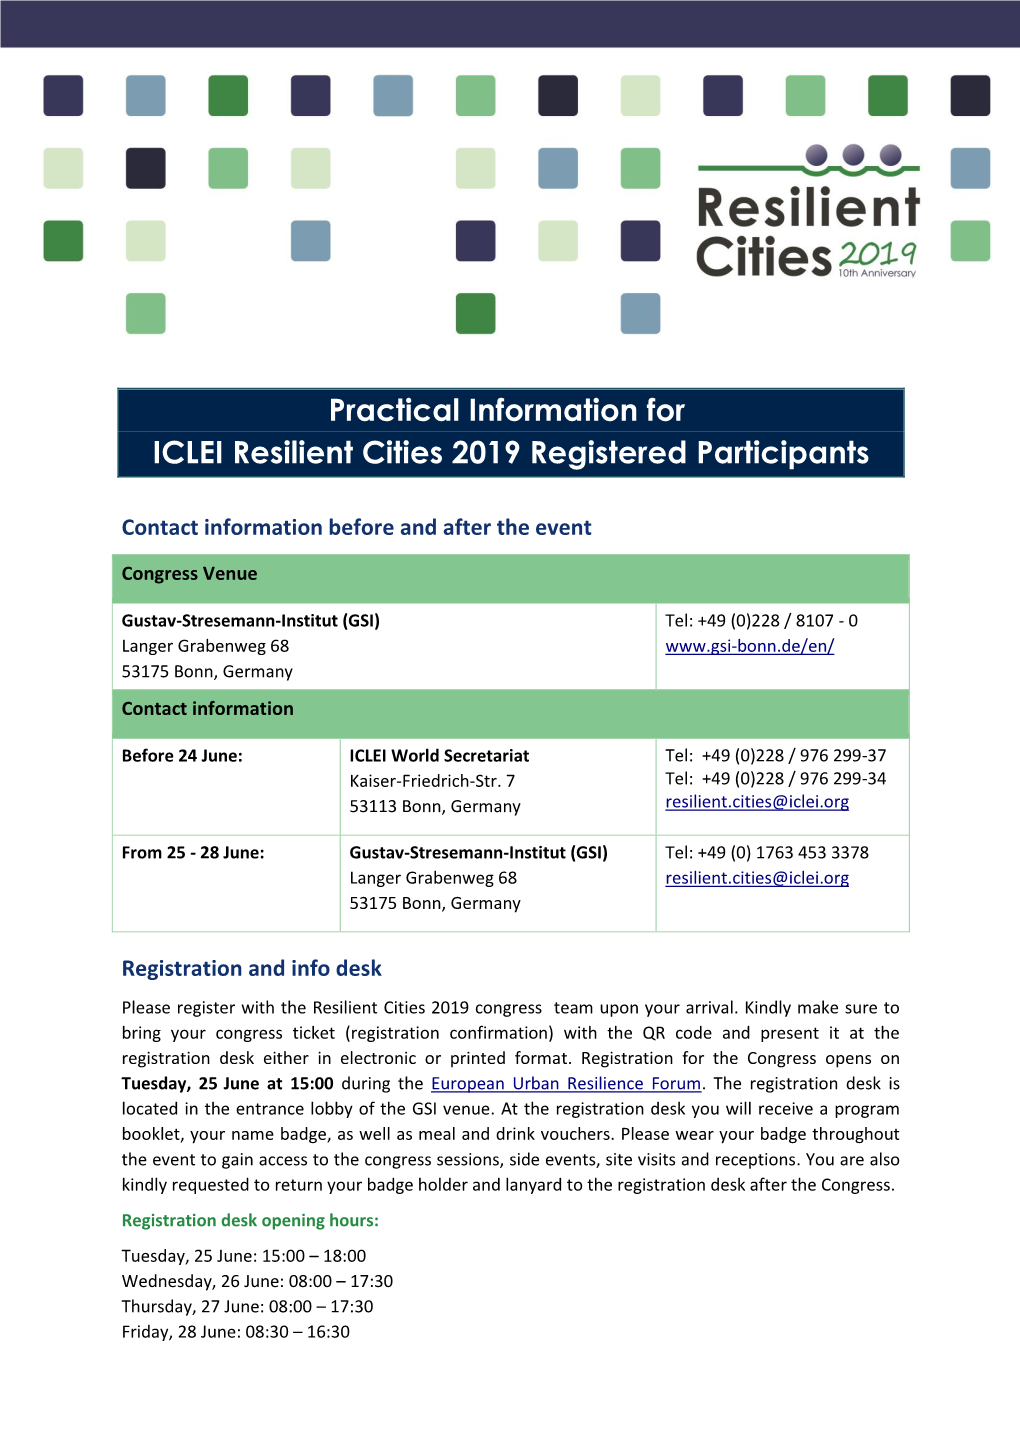 Practical Information for ICLEI Resilient Cities 2019 Registered Participants